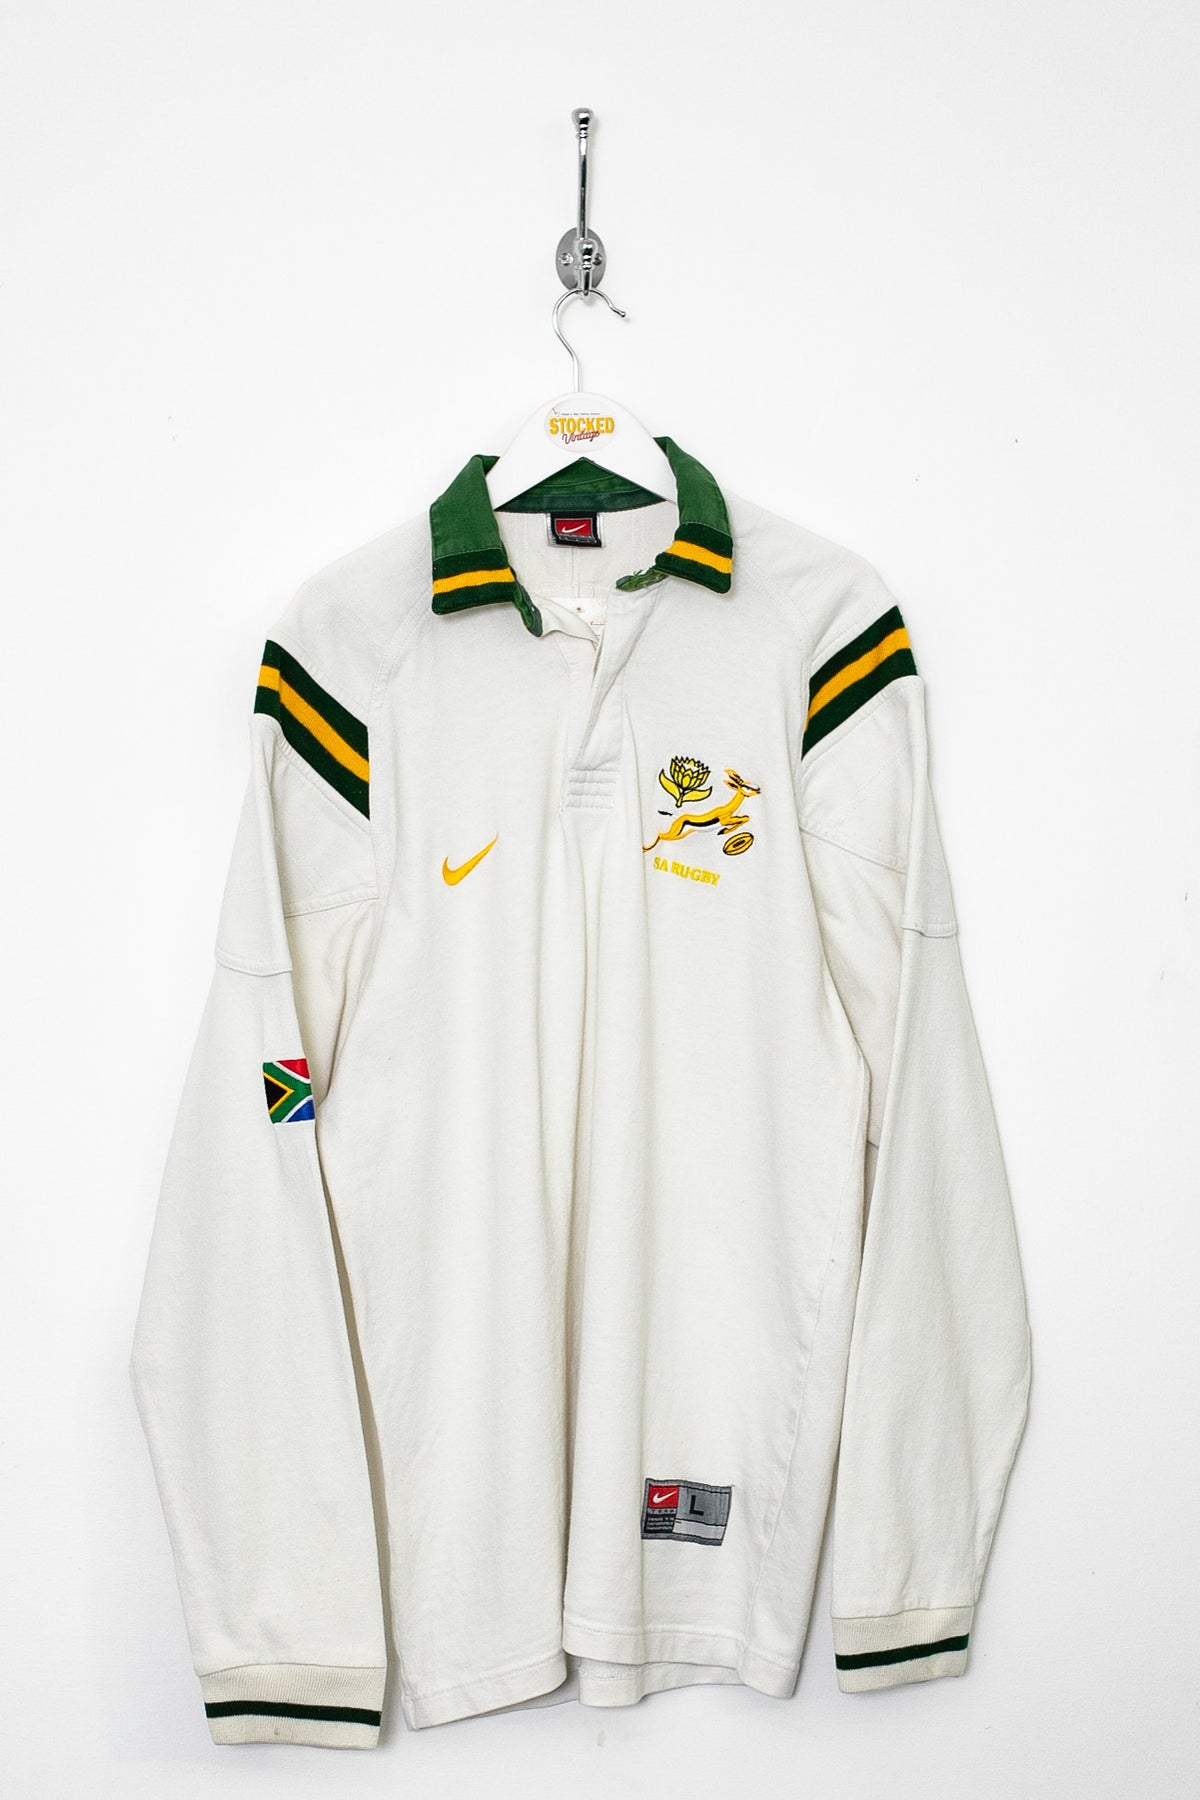 00s Nike South Africa Rugby Shirt (L)